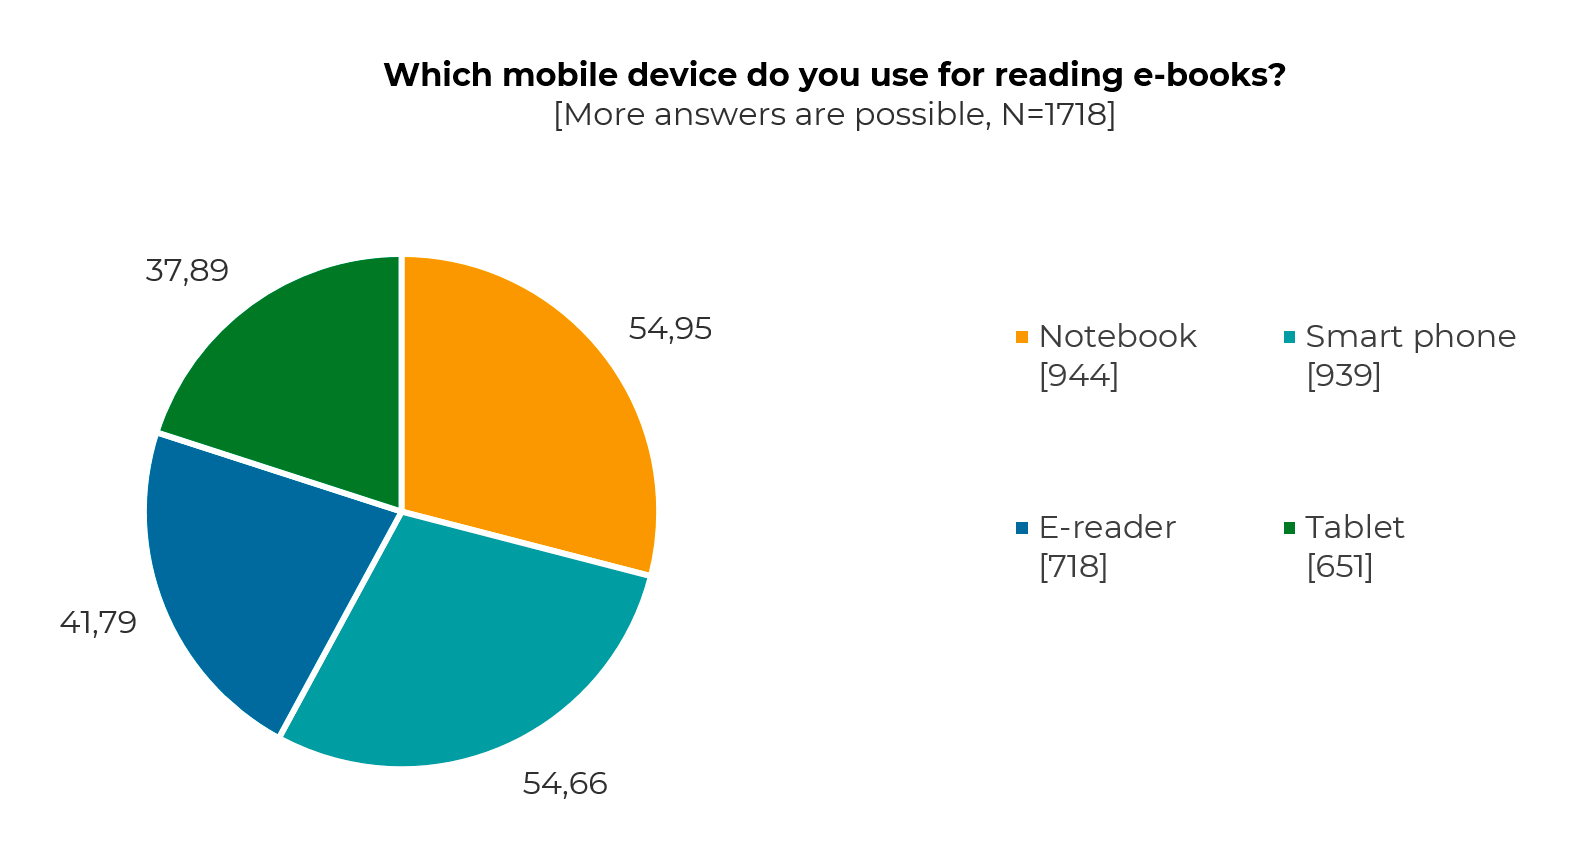 Which mobile device do you use for reading e-books?